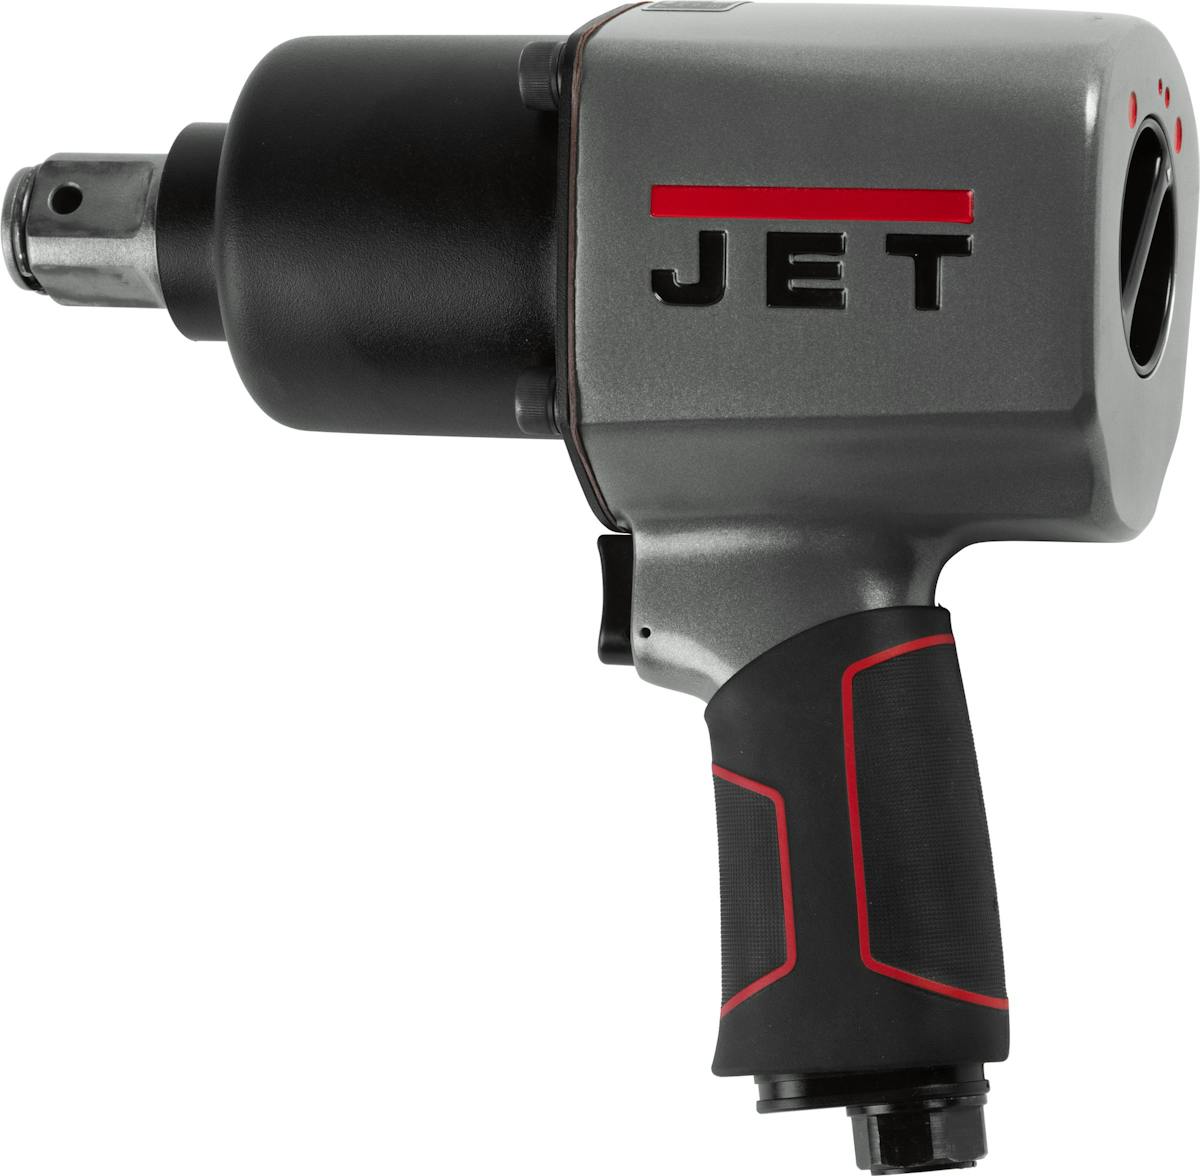 Jet1in impact Wrench (1)